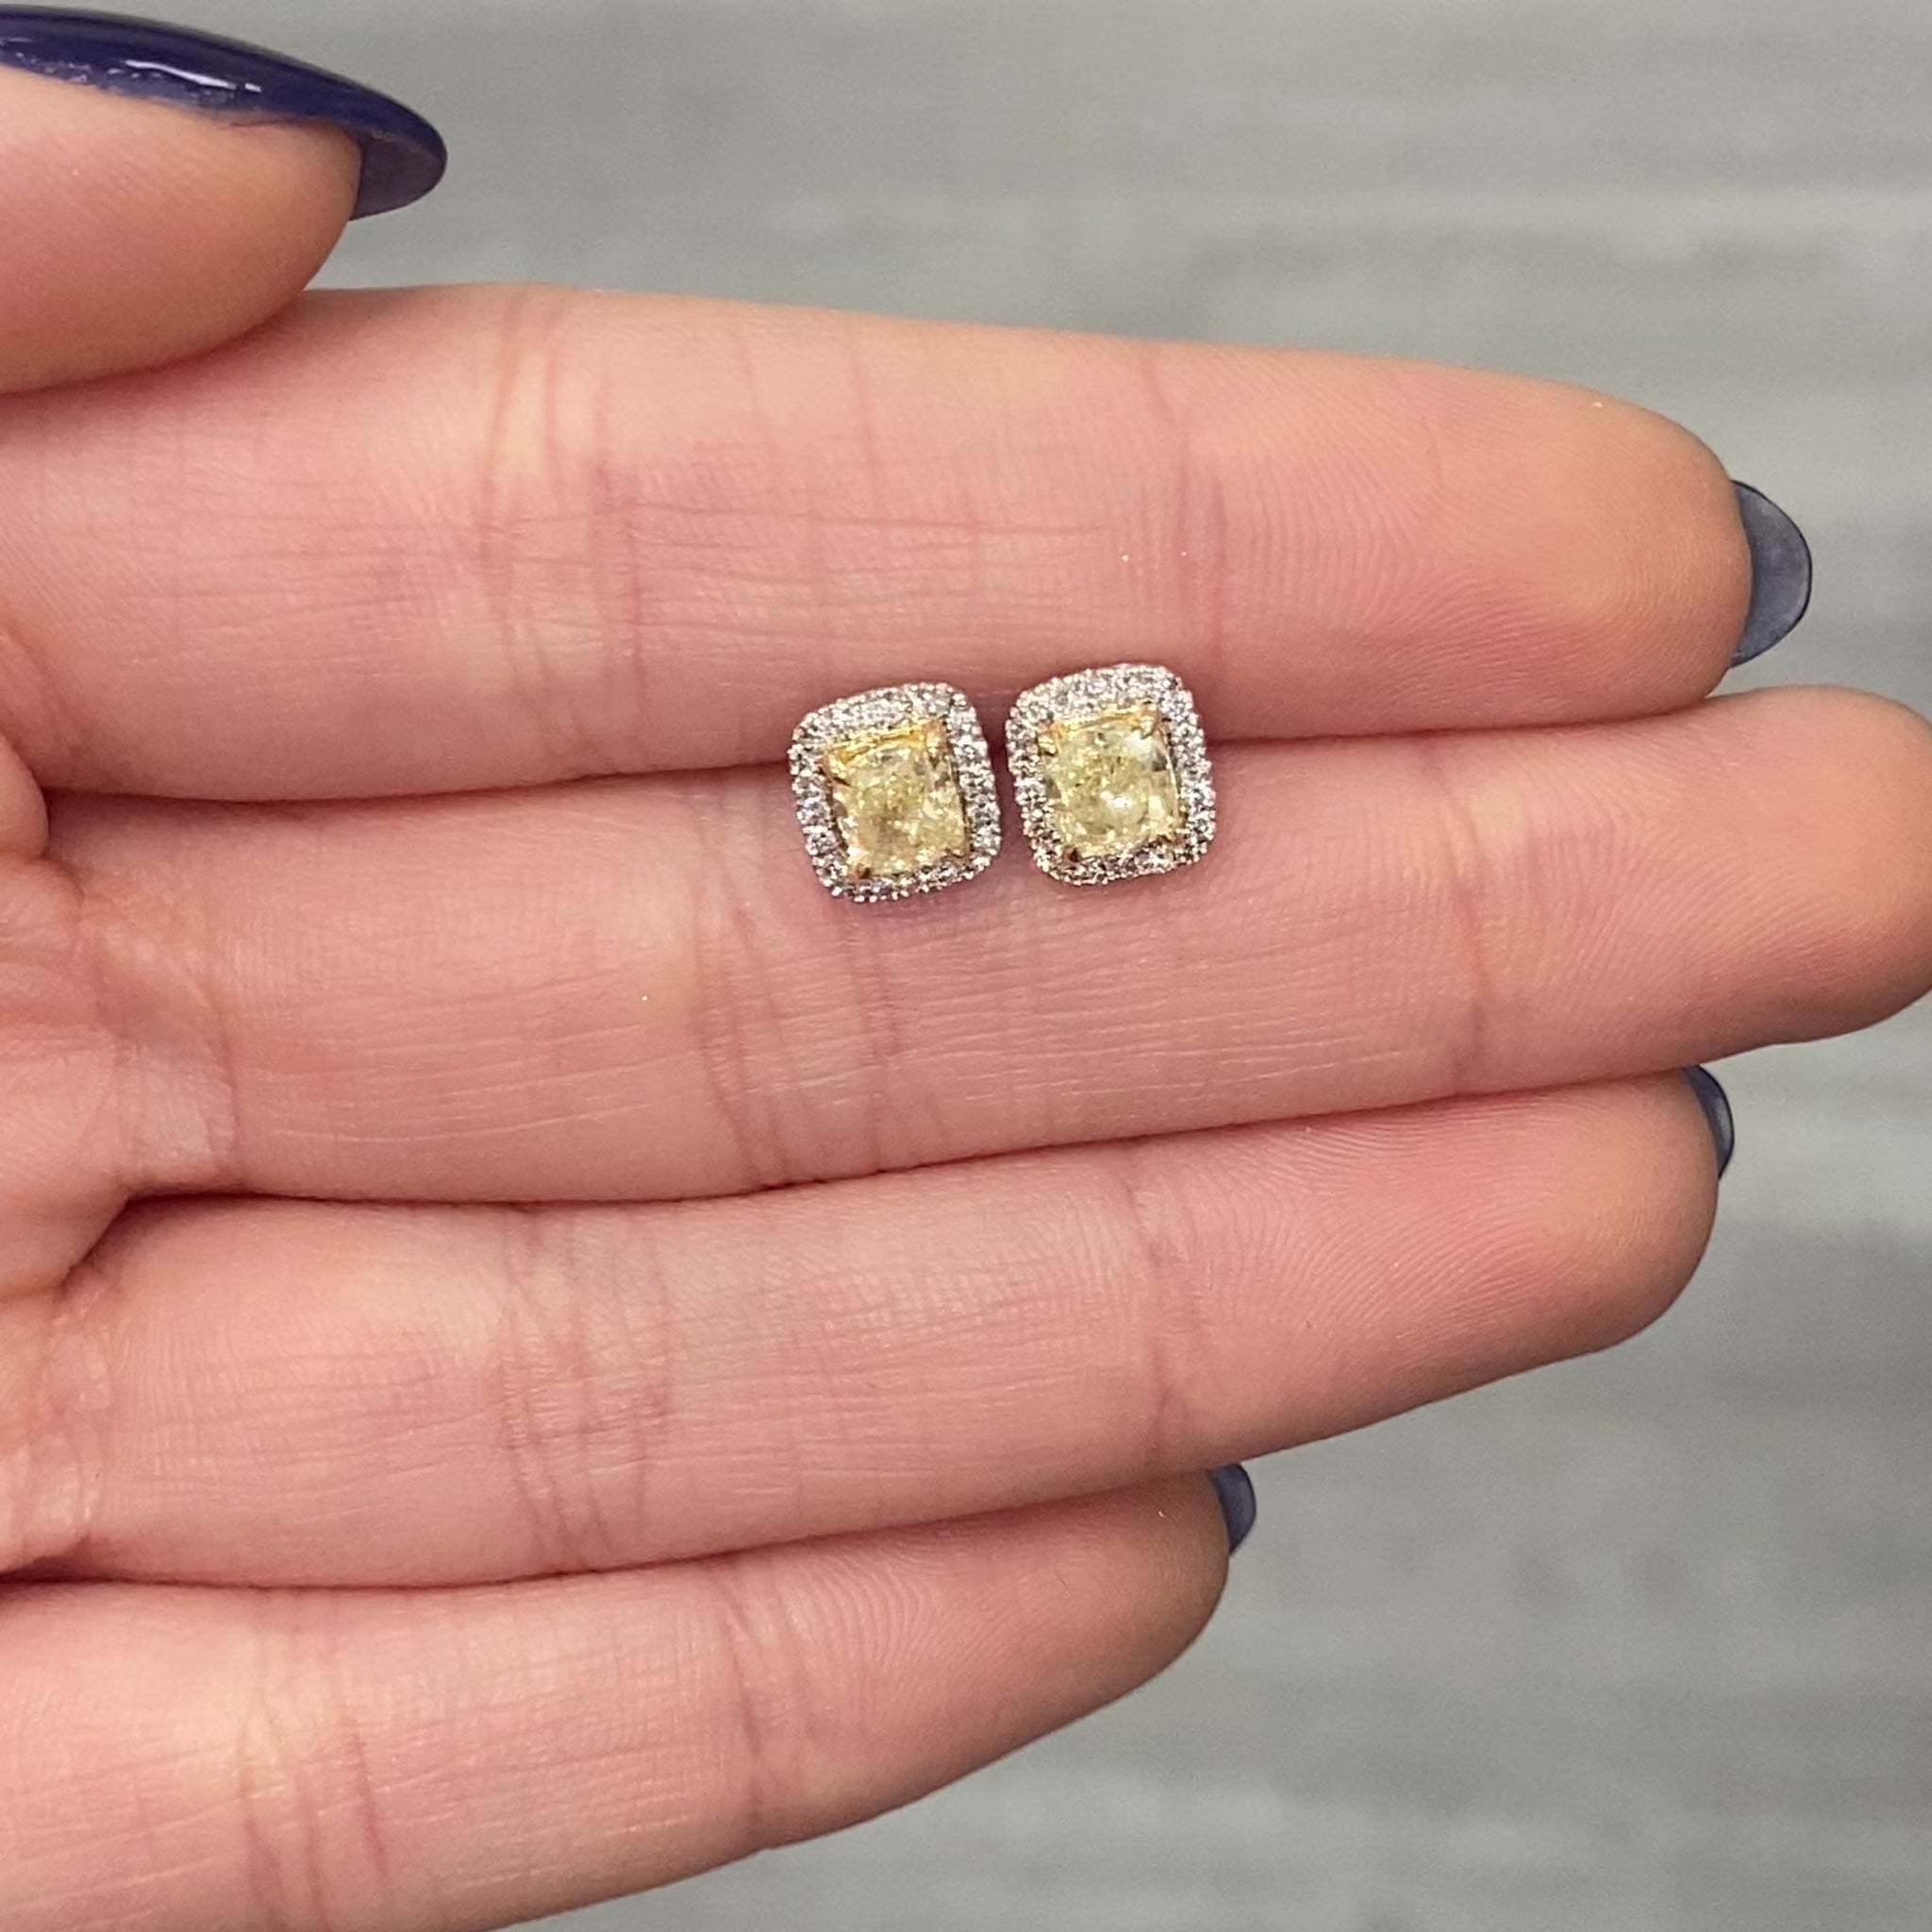 Fancy Light Yellow Cushion Diamond Studs 1.42 carat total center diamonds  Center diamonds are 0.71ct each  Surrounded by 0.22 Carats of White Radiant Diamonds Set in 18k Gold Handmade in NYC 